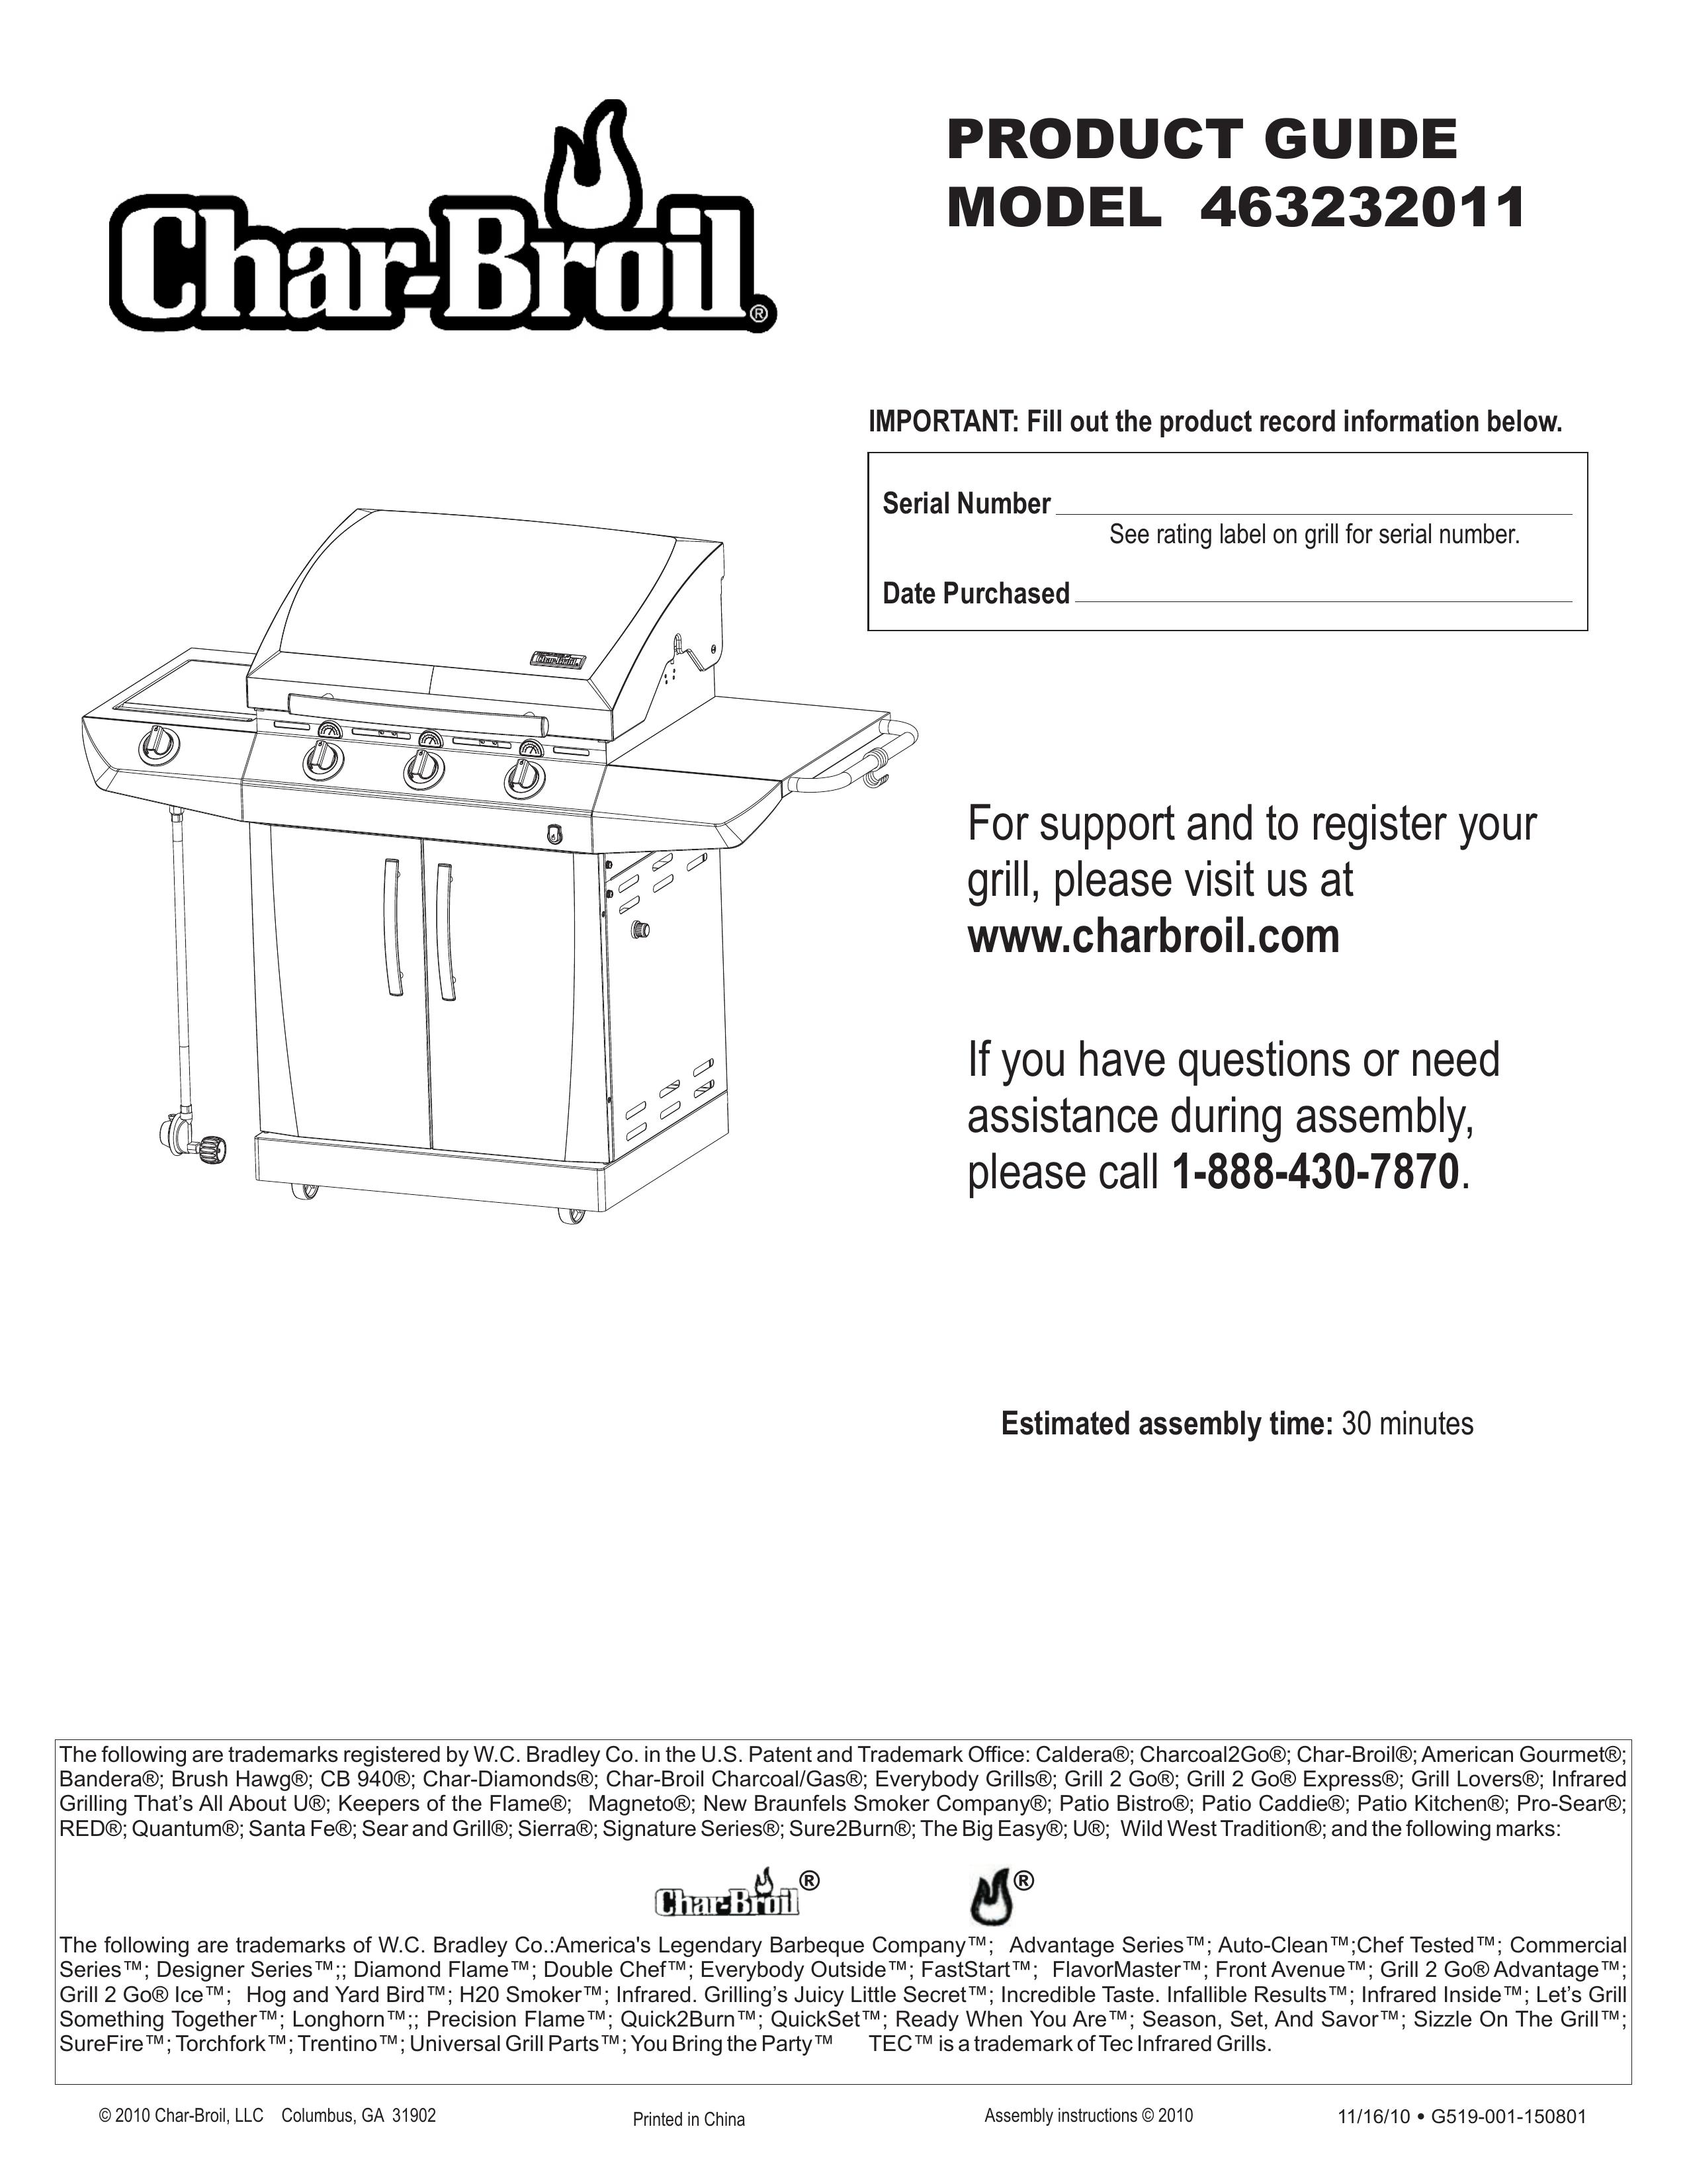 Char-Broil 463232011 Charcoal Grill User Manual